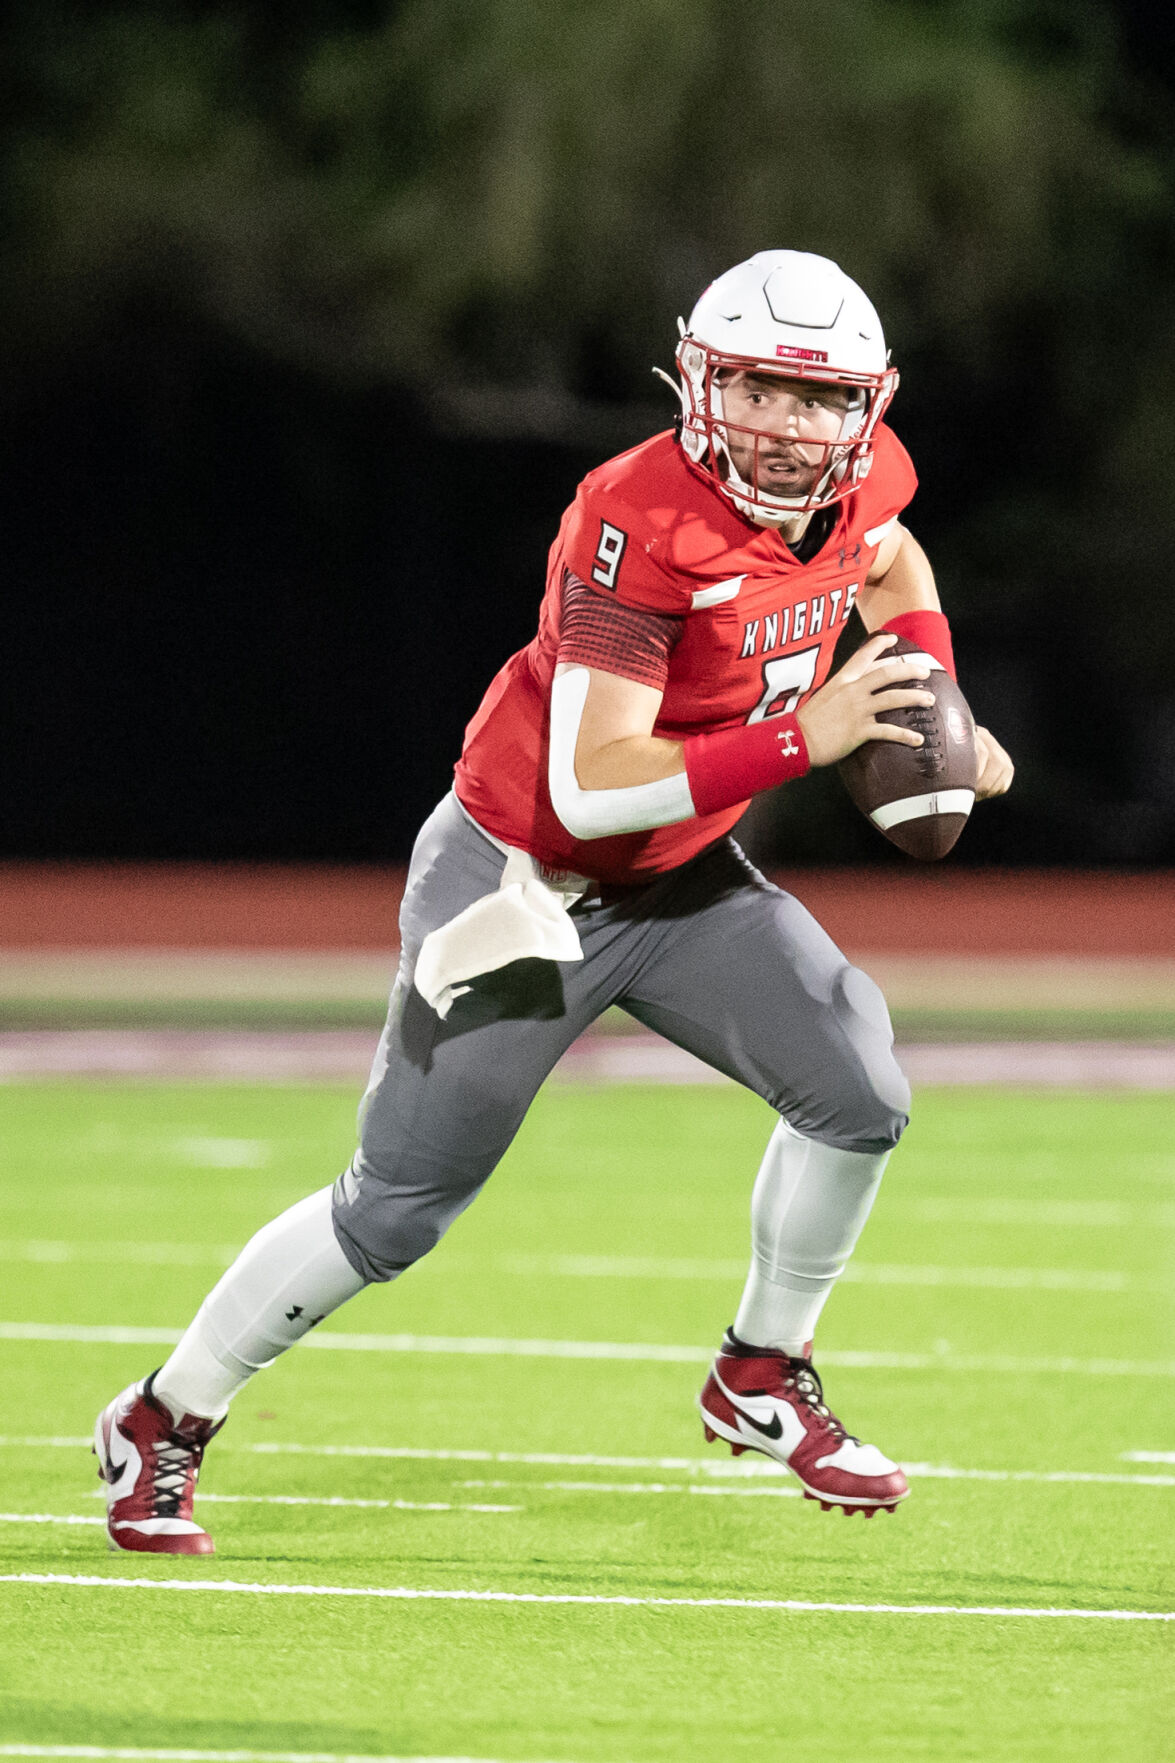 Harker Heights’ Dylan Plake leads team to victory with impressive 352 yards and five touchdowns